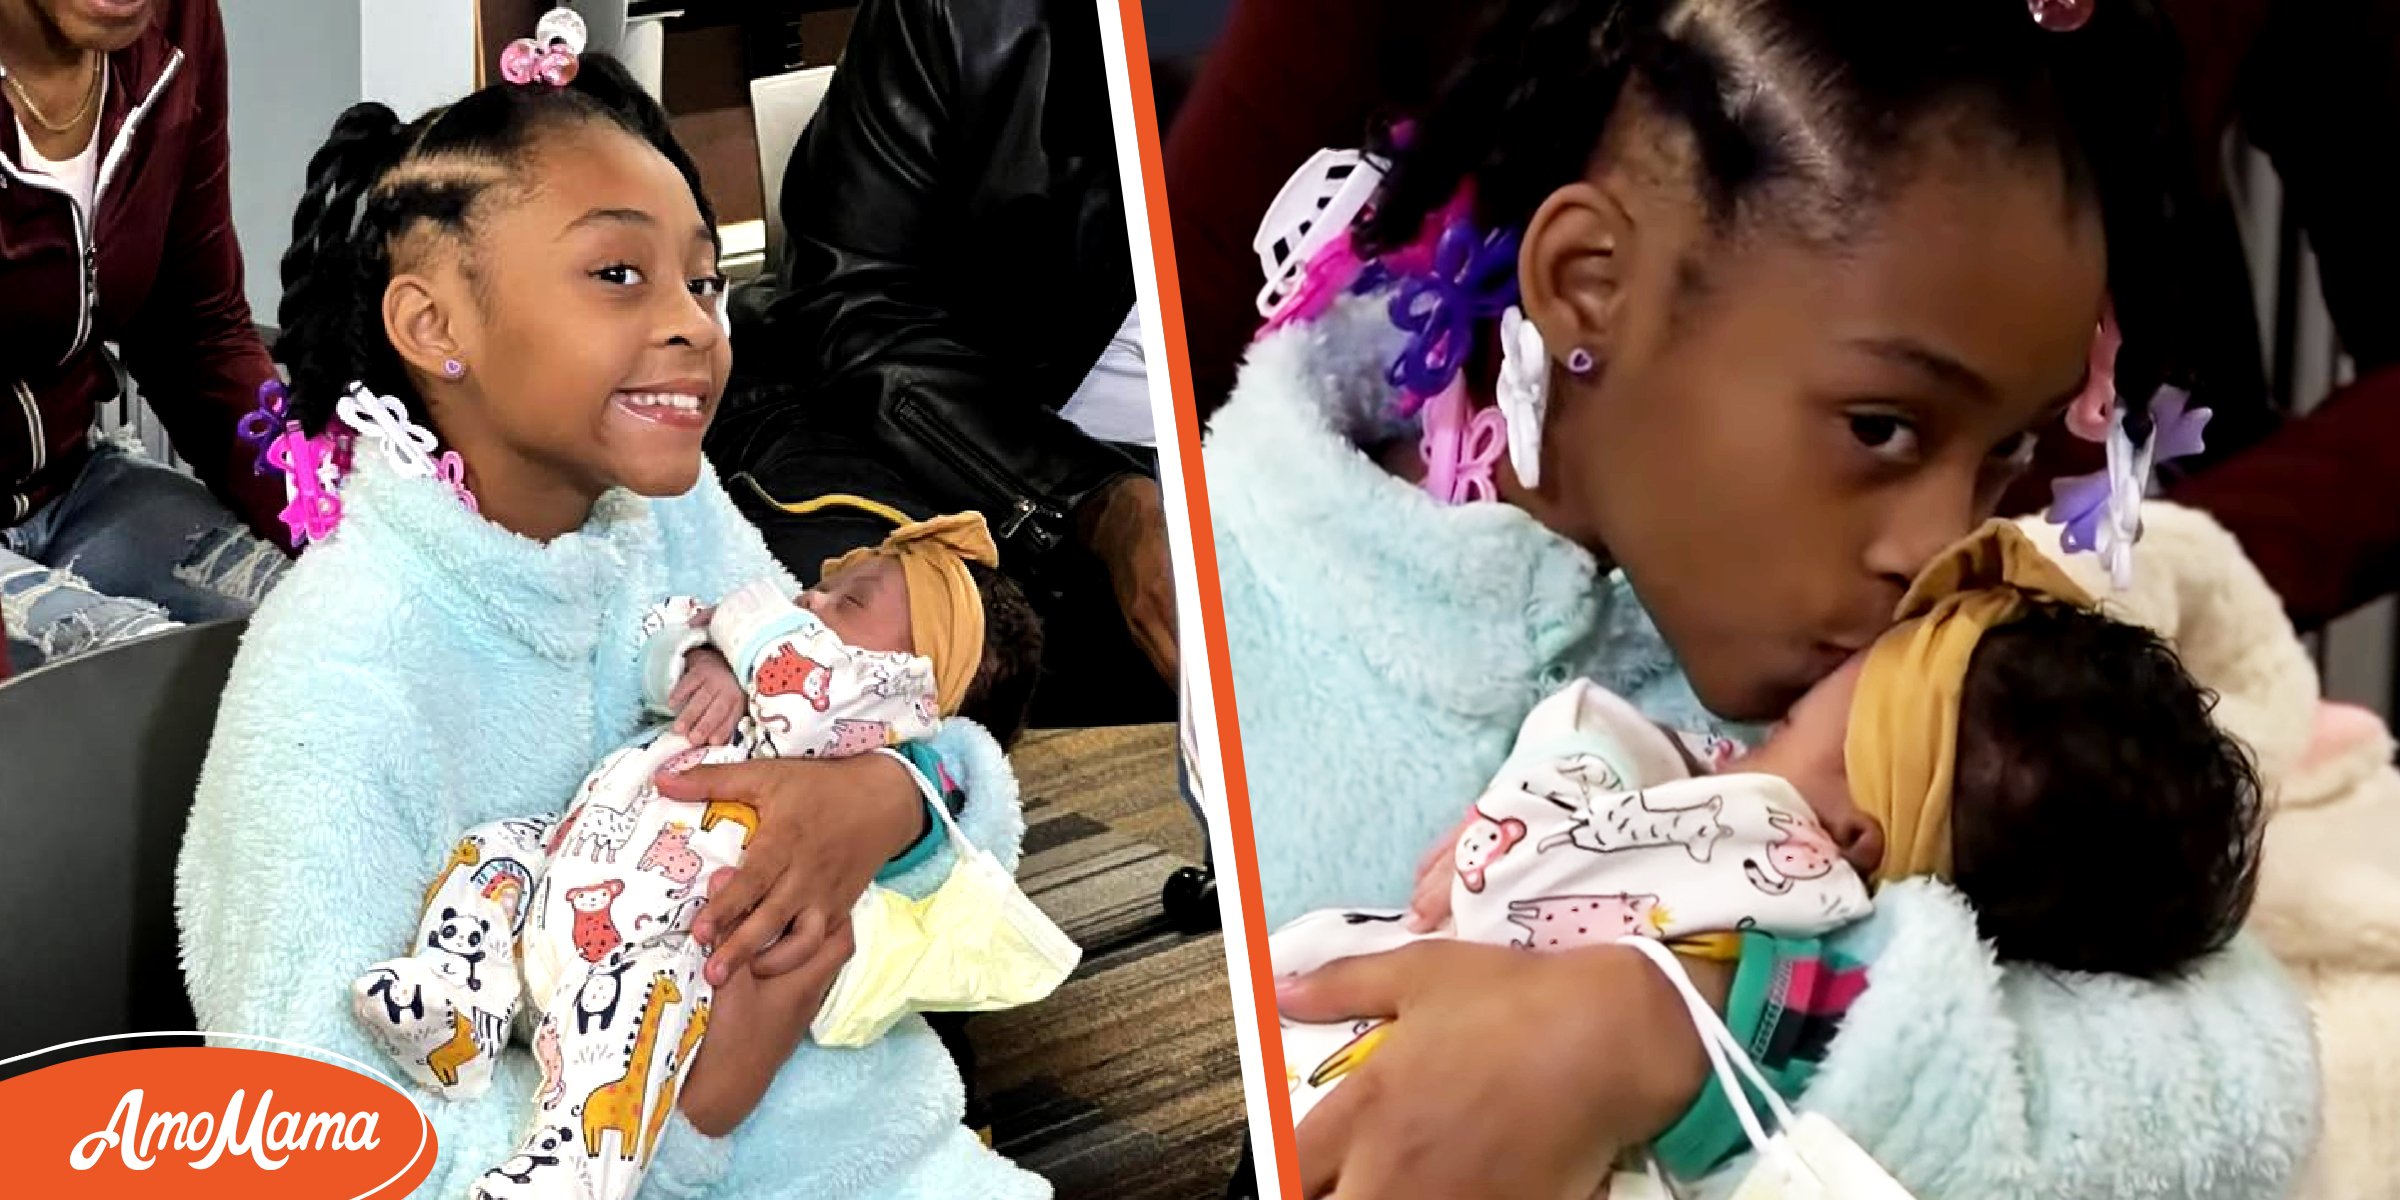 Miracle, a 10-year old Missouri girl, helps her mother deliver her baby at home